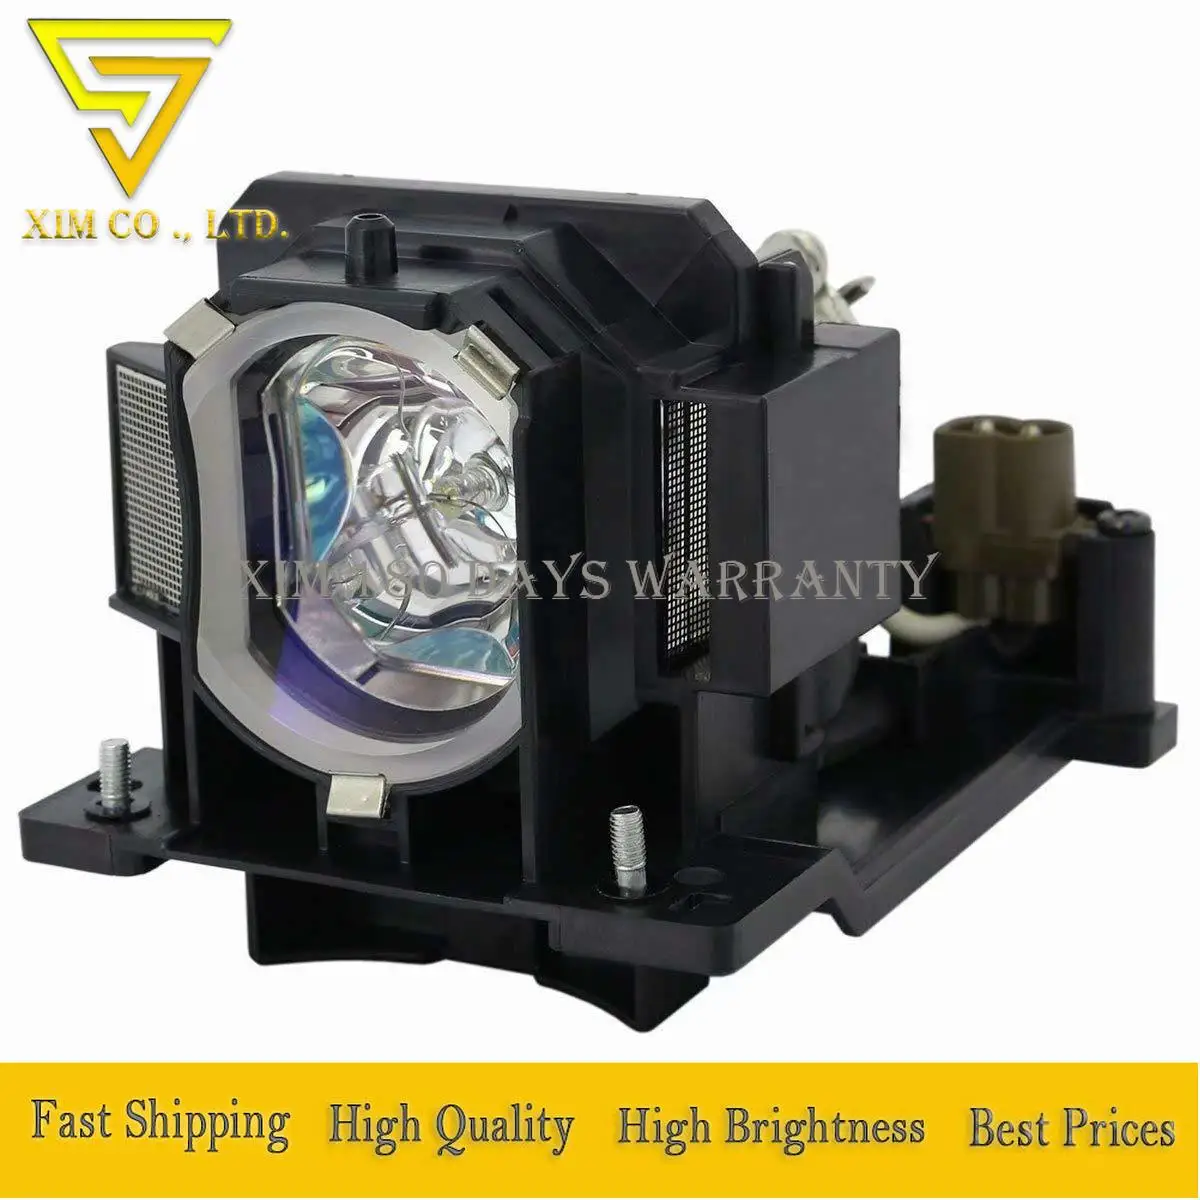 DT01091 Projector Lamp For Hitachi CP-AW100N CP-D10 CP-DW10 ED-AW100N ED-AW110N HCP-Q3 HCP-Q3W CP-DW1 high quality With Housing dt00891 compatible hitachi projector lamp bulb for cp a100 ed a100 ed a110 cp a101 cp a100 cp a100j cp a101 ed a100 ed a100j